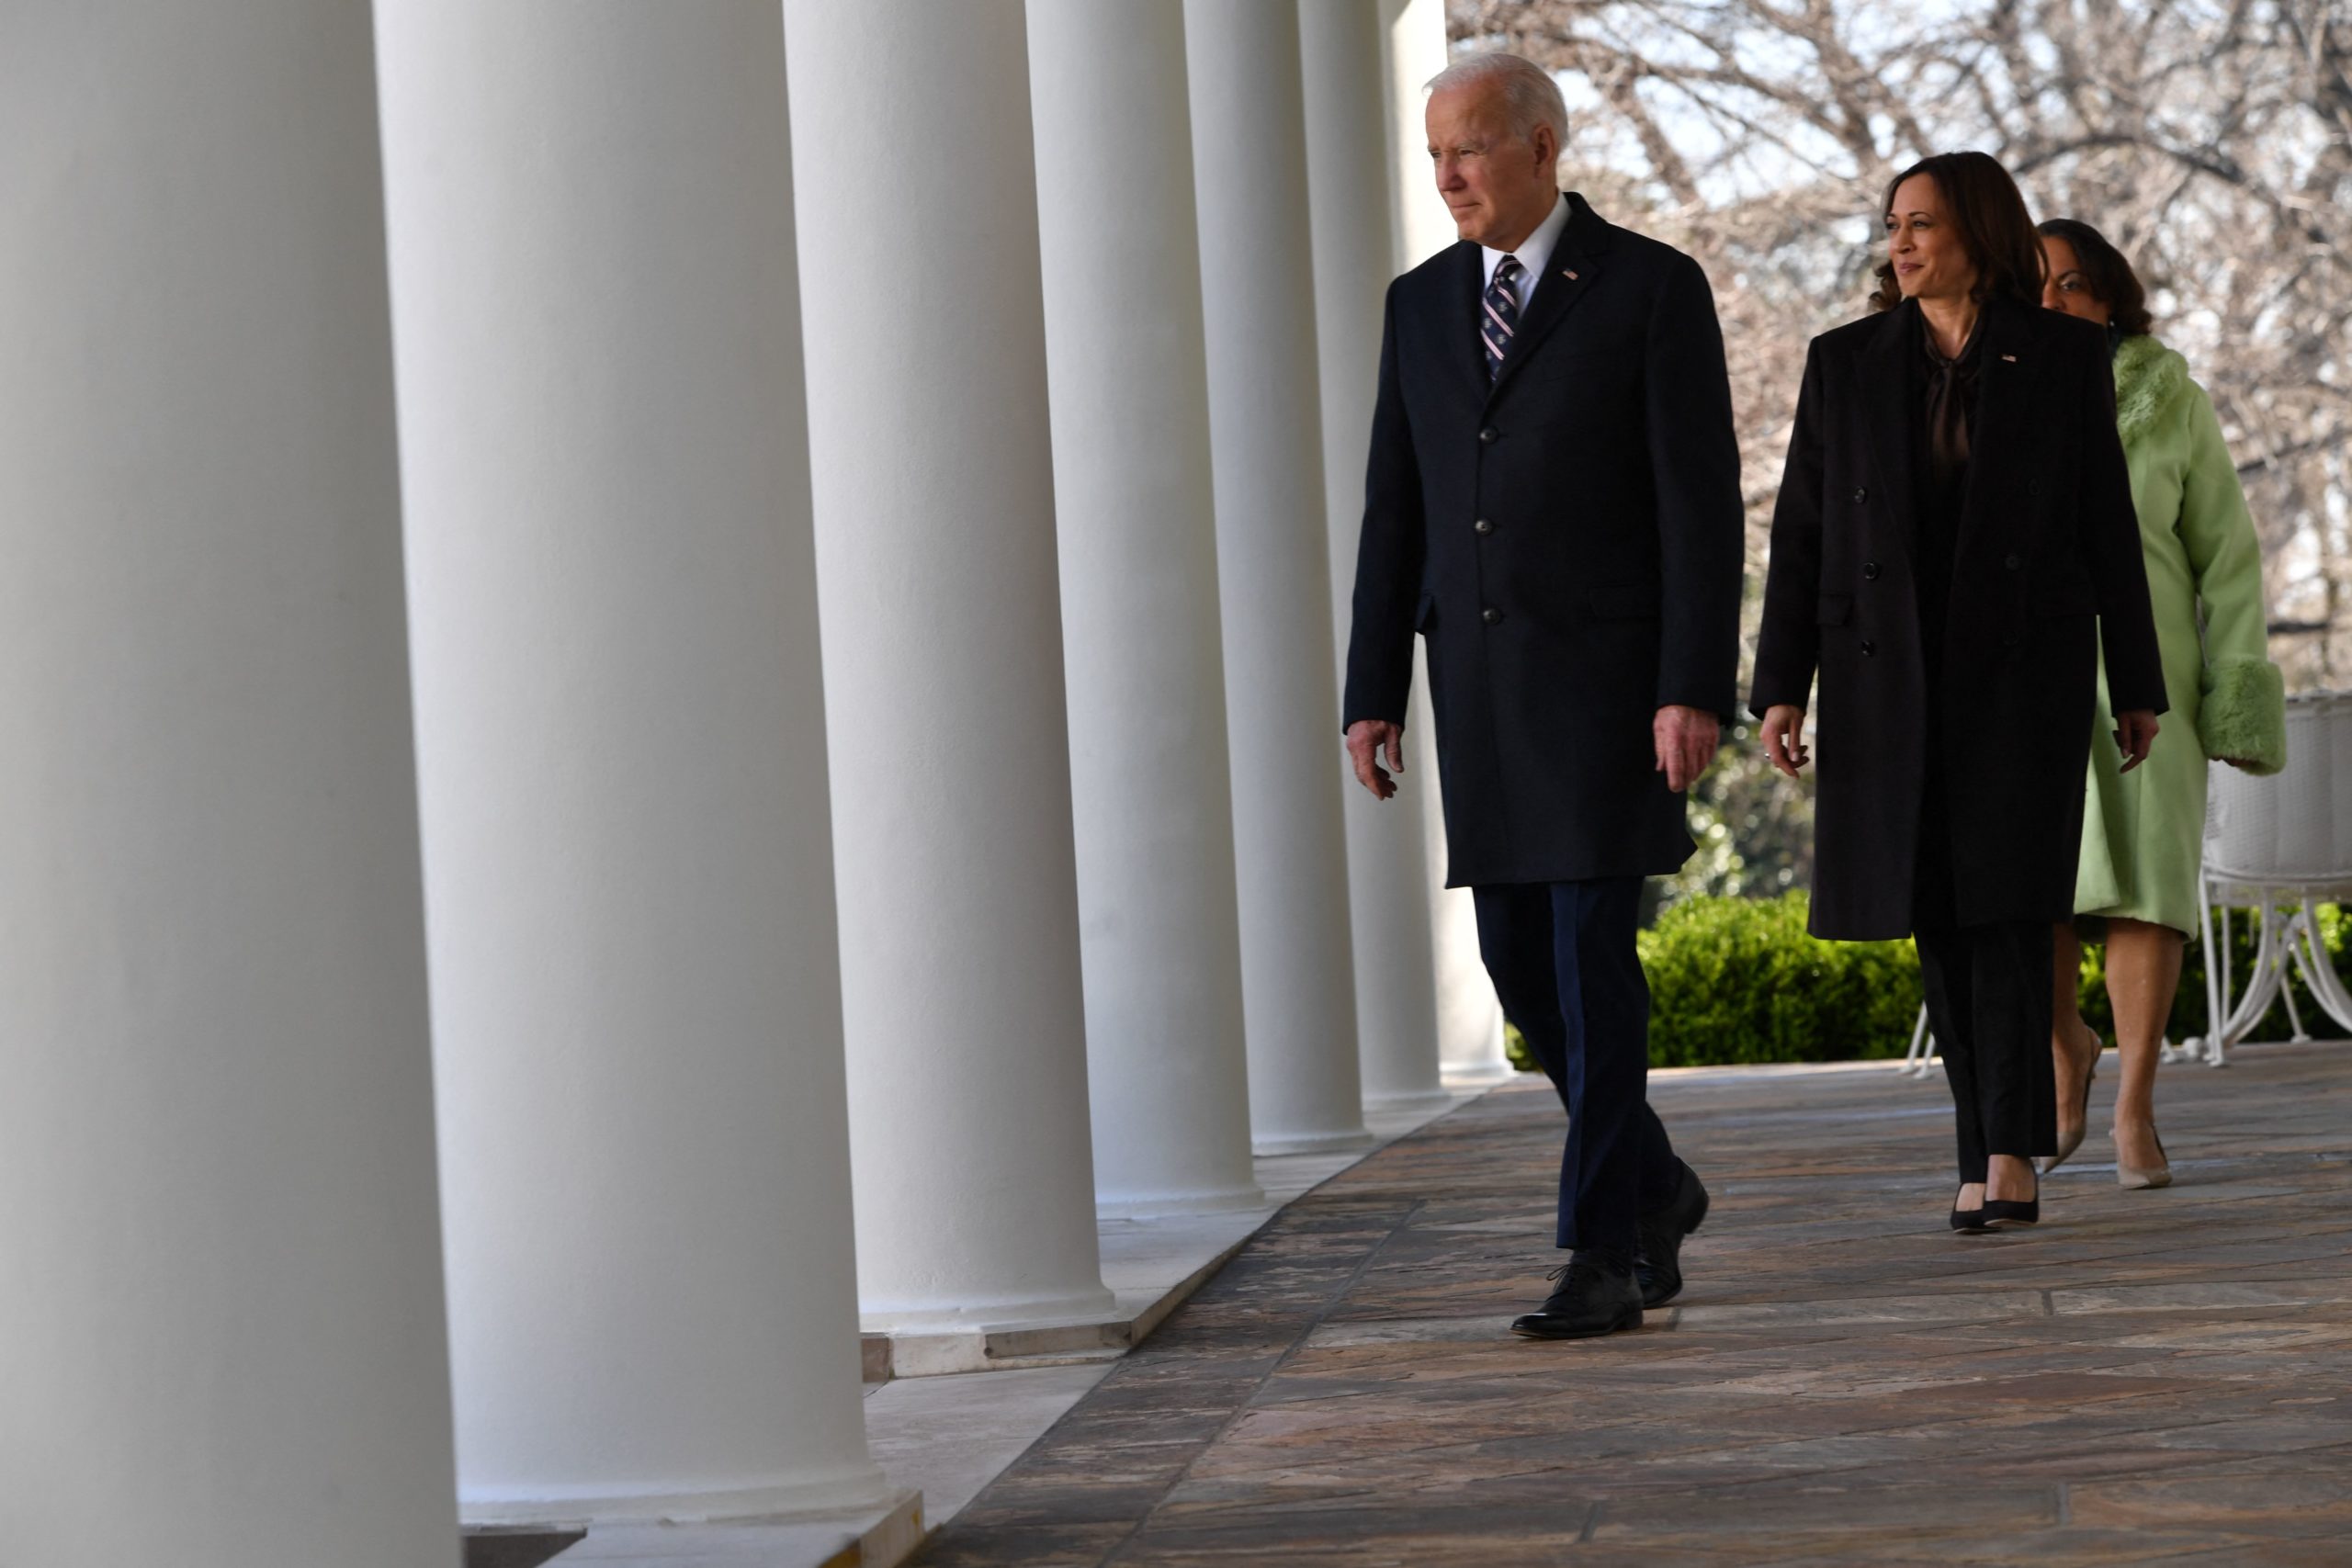 US President Joe Biden, Vice President Kamala Harris and Michelle Duster, great-granddaughter of civil rights pioneer Ida B. Wells, arrive for a signing ceremony of the Emmett Till Anti-lynching Act, making lynching a hate crime under federal law, in the Rose Garden of the White House in Washington, DC, March 29, 2022. (Photo by Nicholas Kamm / AFP) (Photo by NICHOLAS KAMM/AFP via Getty Images)